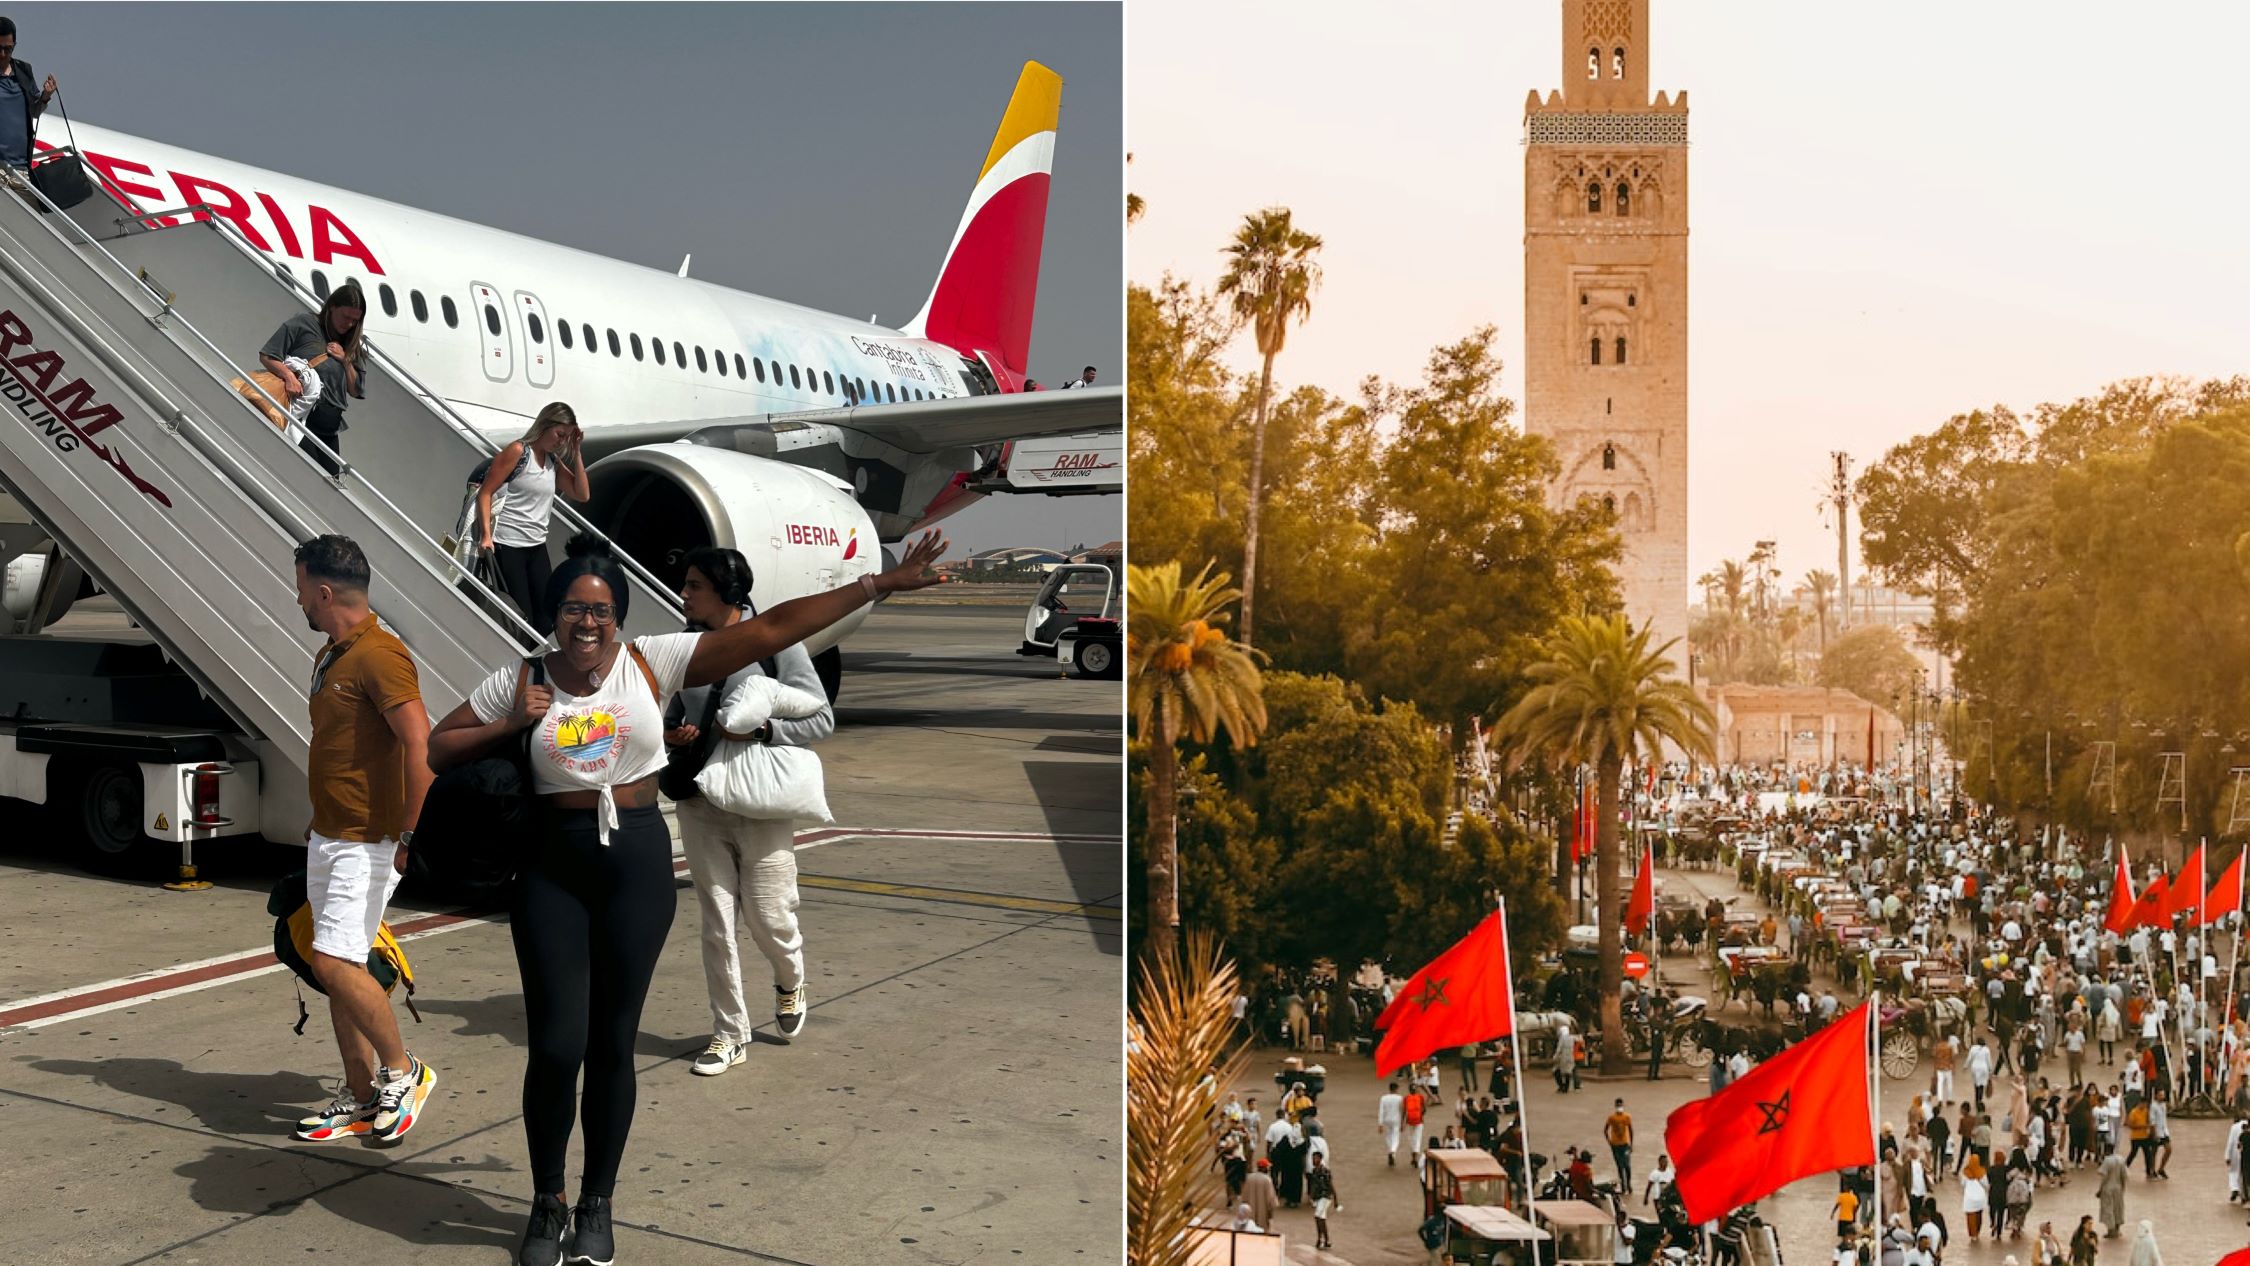 Two images of my Morocco vacation. On the left is a woman standing outside a plane that just landed in Morocco and on the right is the Marrakech Medina with Moroccan flags.